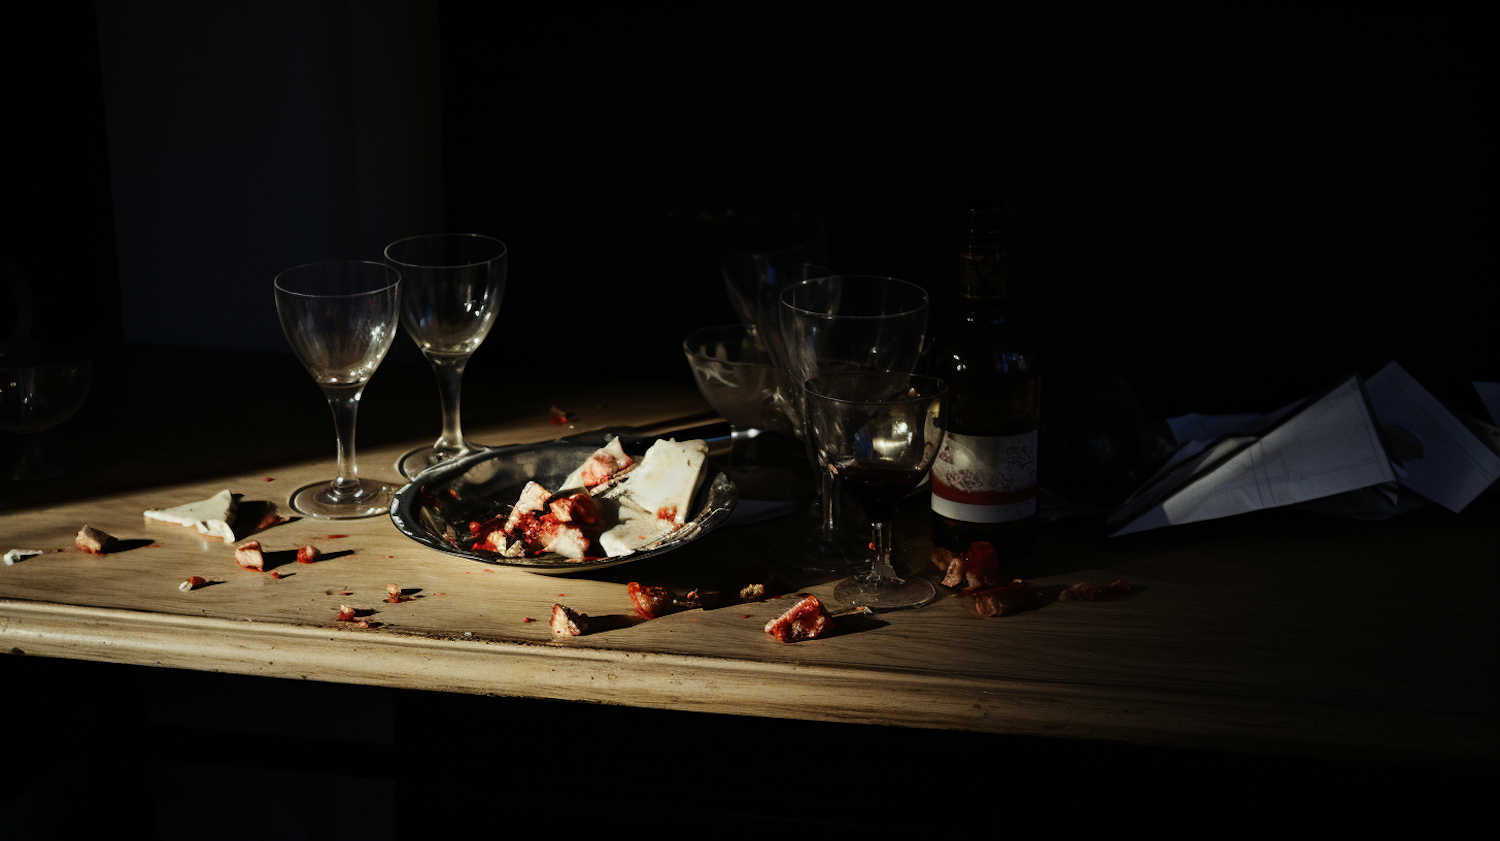 Remnants of Revelry: A Chiaroscuro Still Life